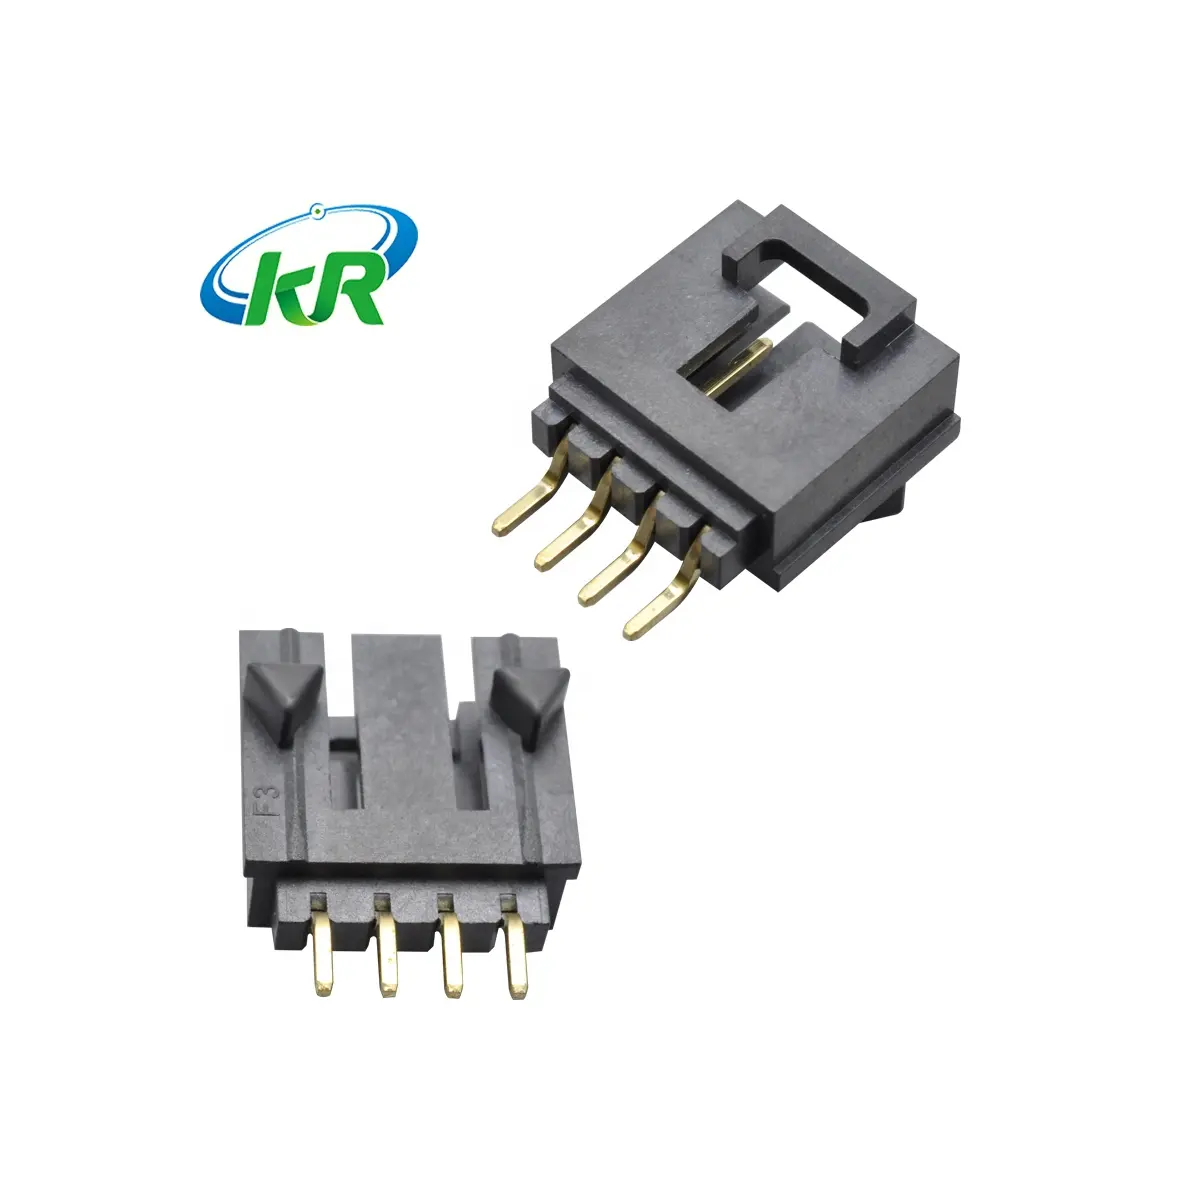 KR2541 2.54mm SL Modular 70543 70058 70066 wire to terminal board female 4 PIN header connectors